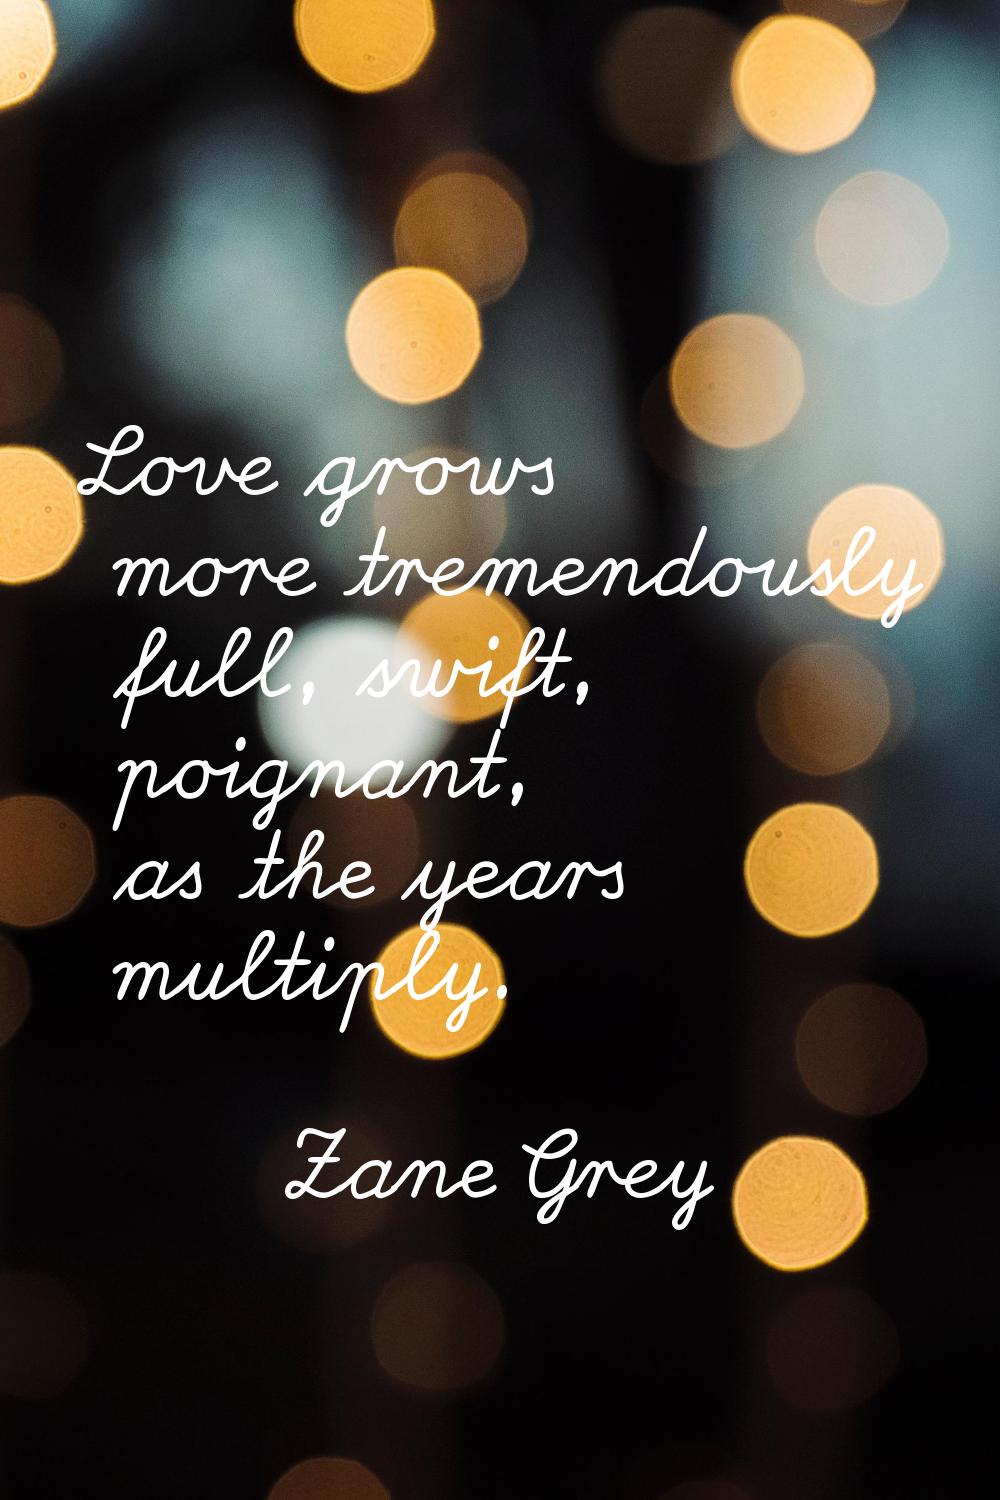 Love grows more tremendously full, swift, poignant, as the years multiply.